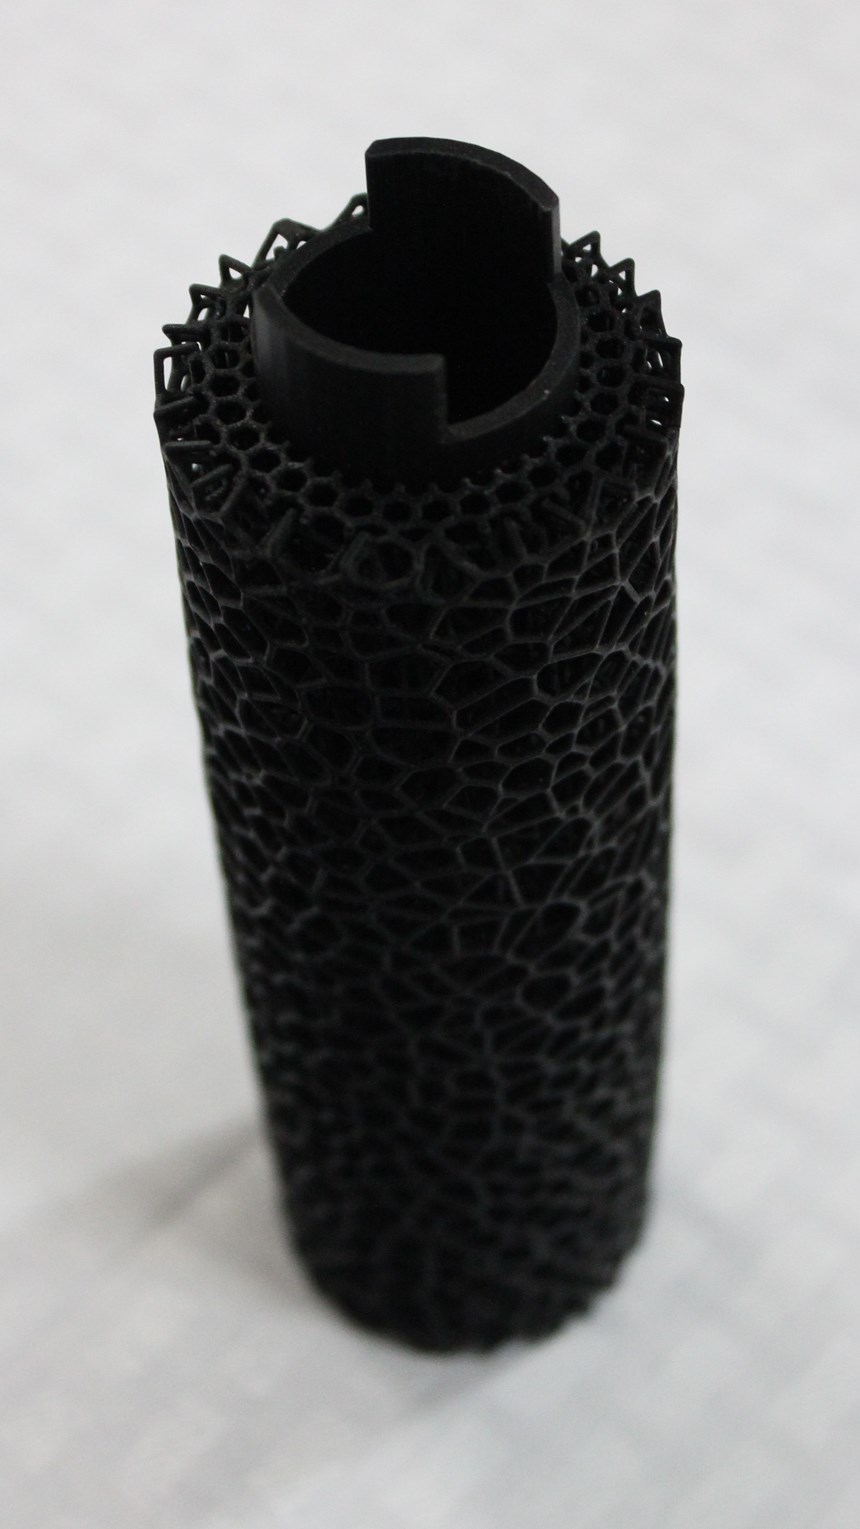 Overmolded 3D printed Carbon part